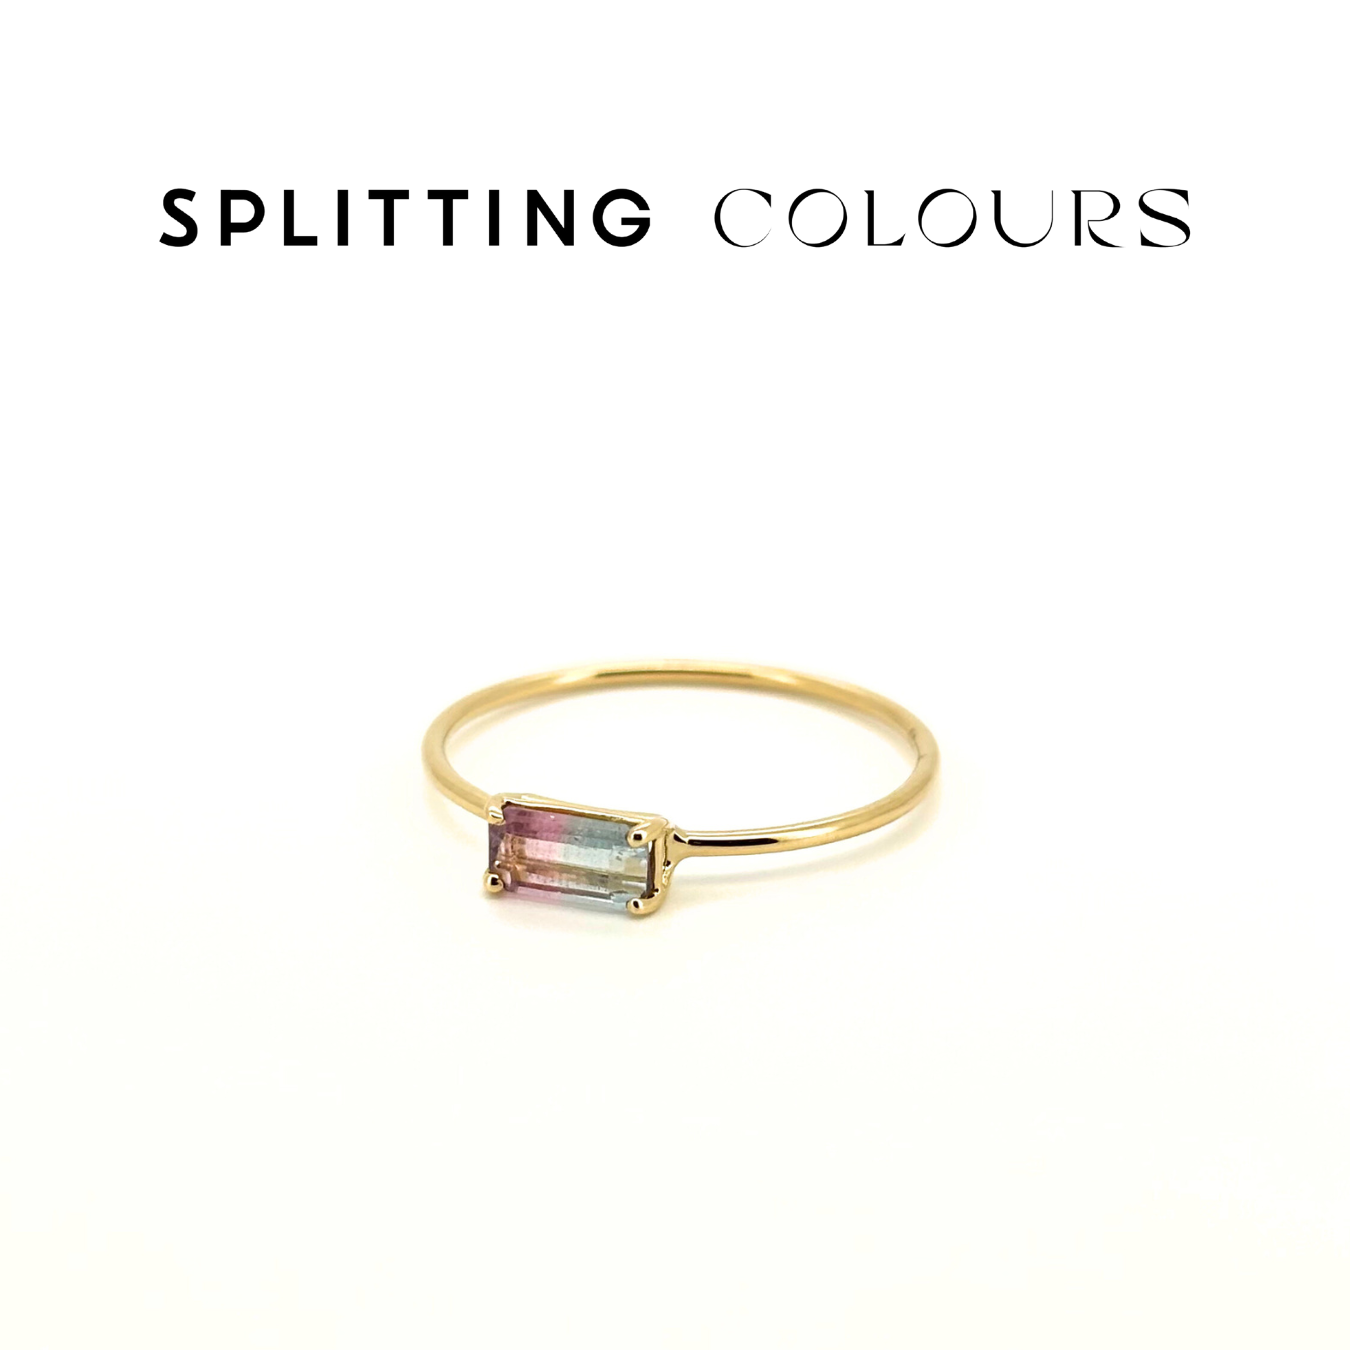 The Petite Ring - 0.27ct Pink and Light Blue Tourmaline